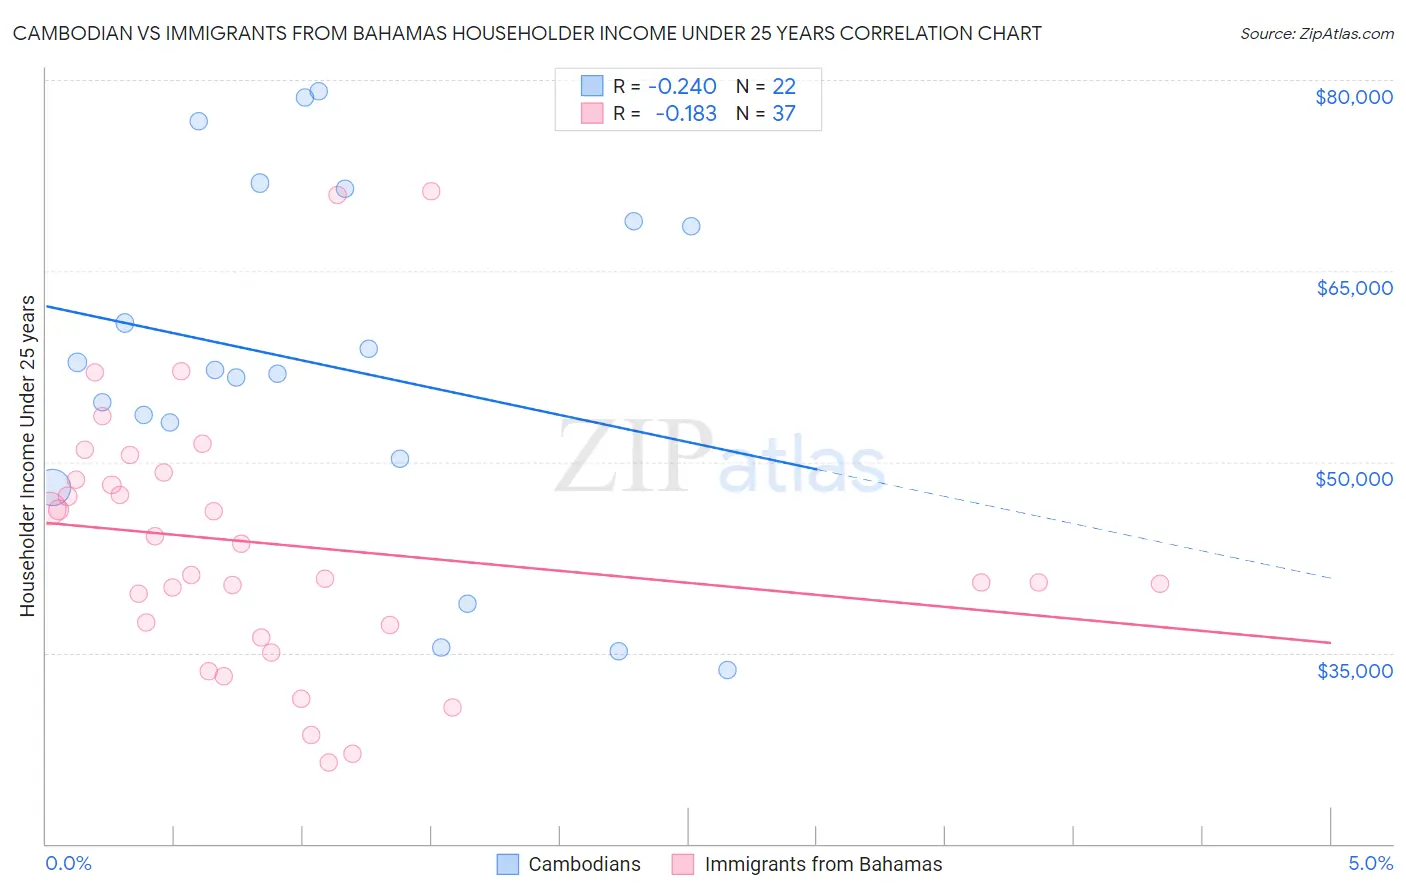 Cambodian vs Immigrants from Bahamas Householder Income Under 25 years